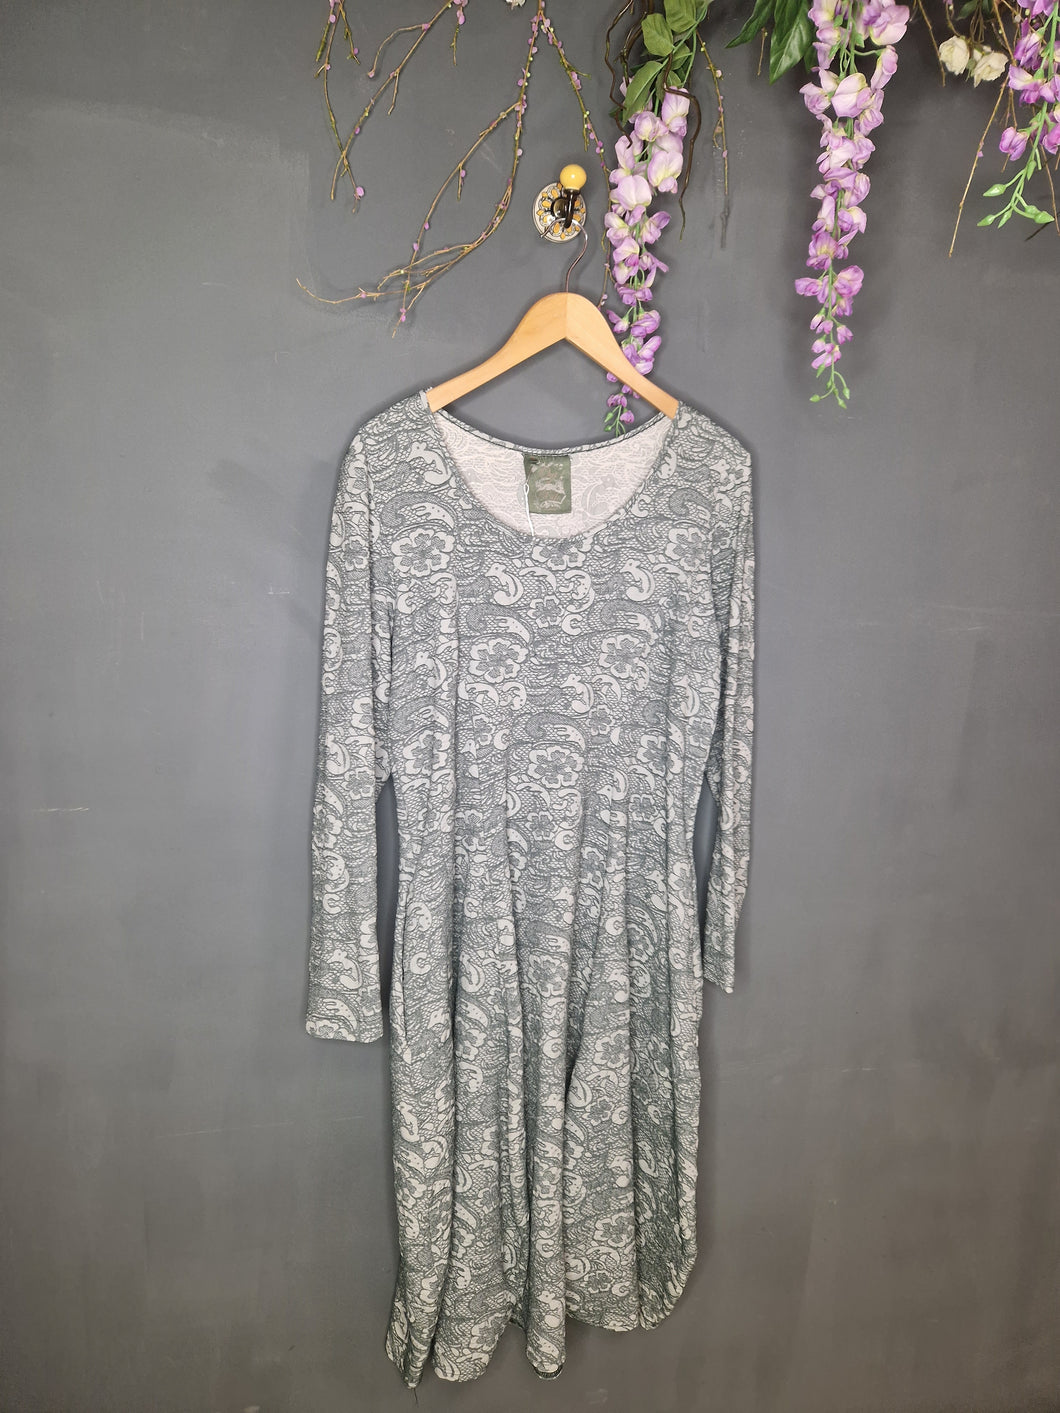 Another Girls Treasure, Out Of Xile Grey Laced Dress with Pockets.